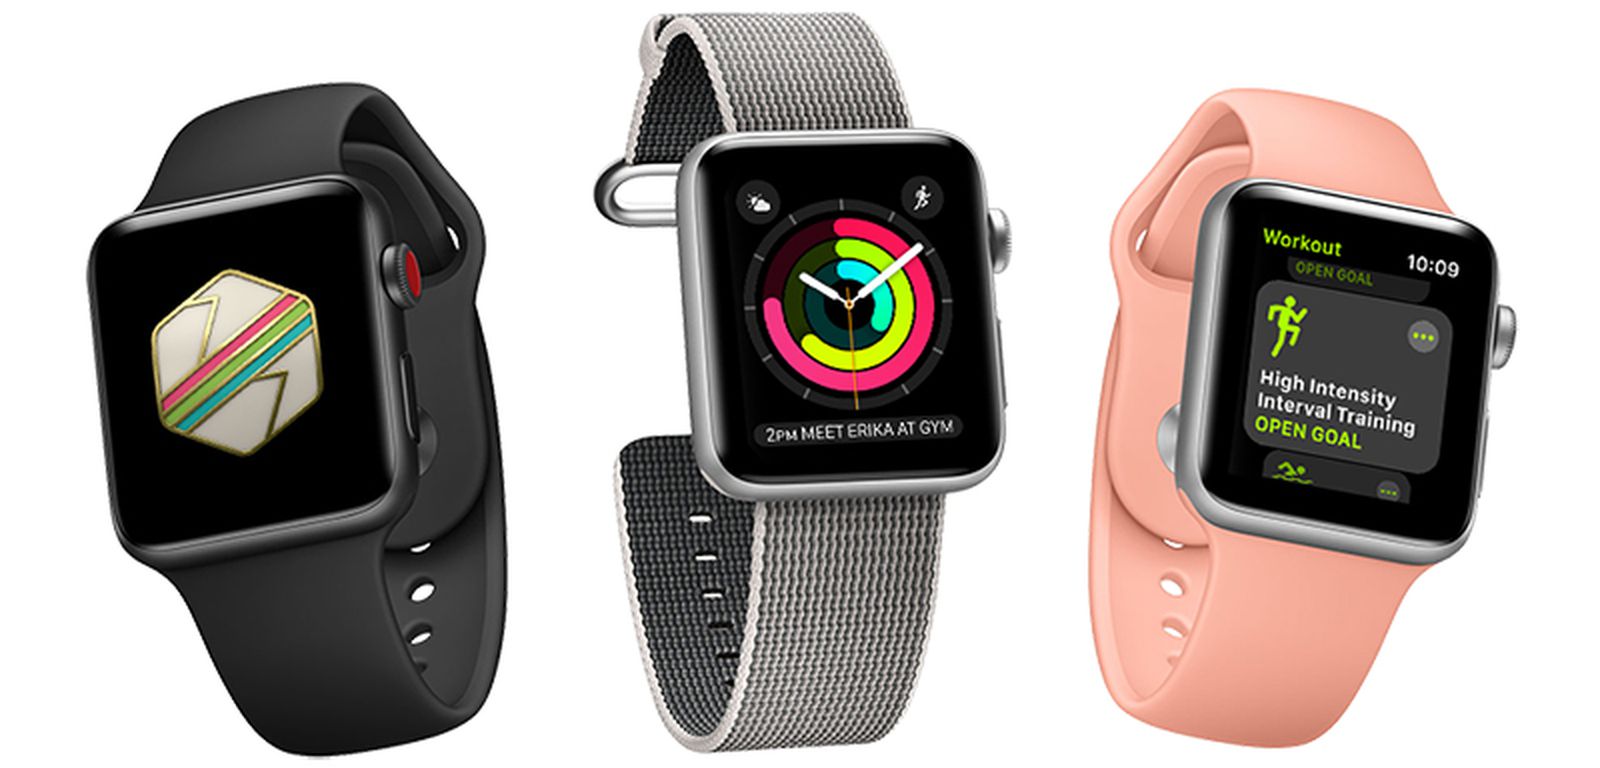 Kuo: Apple Watch Series 3 May Finally Be Discontinued Upon Its 